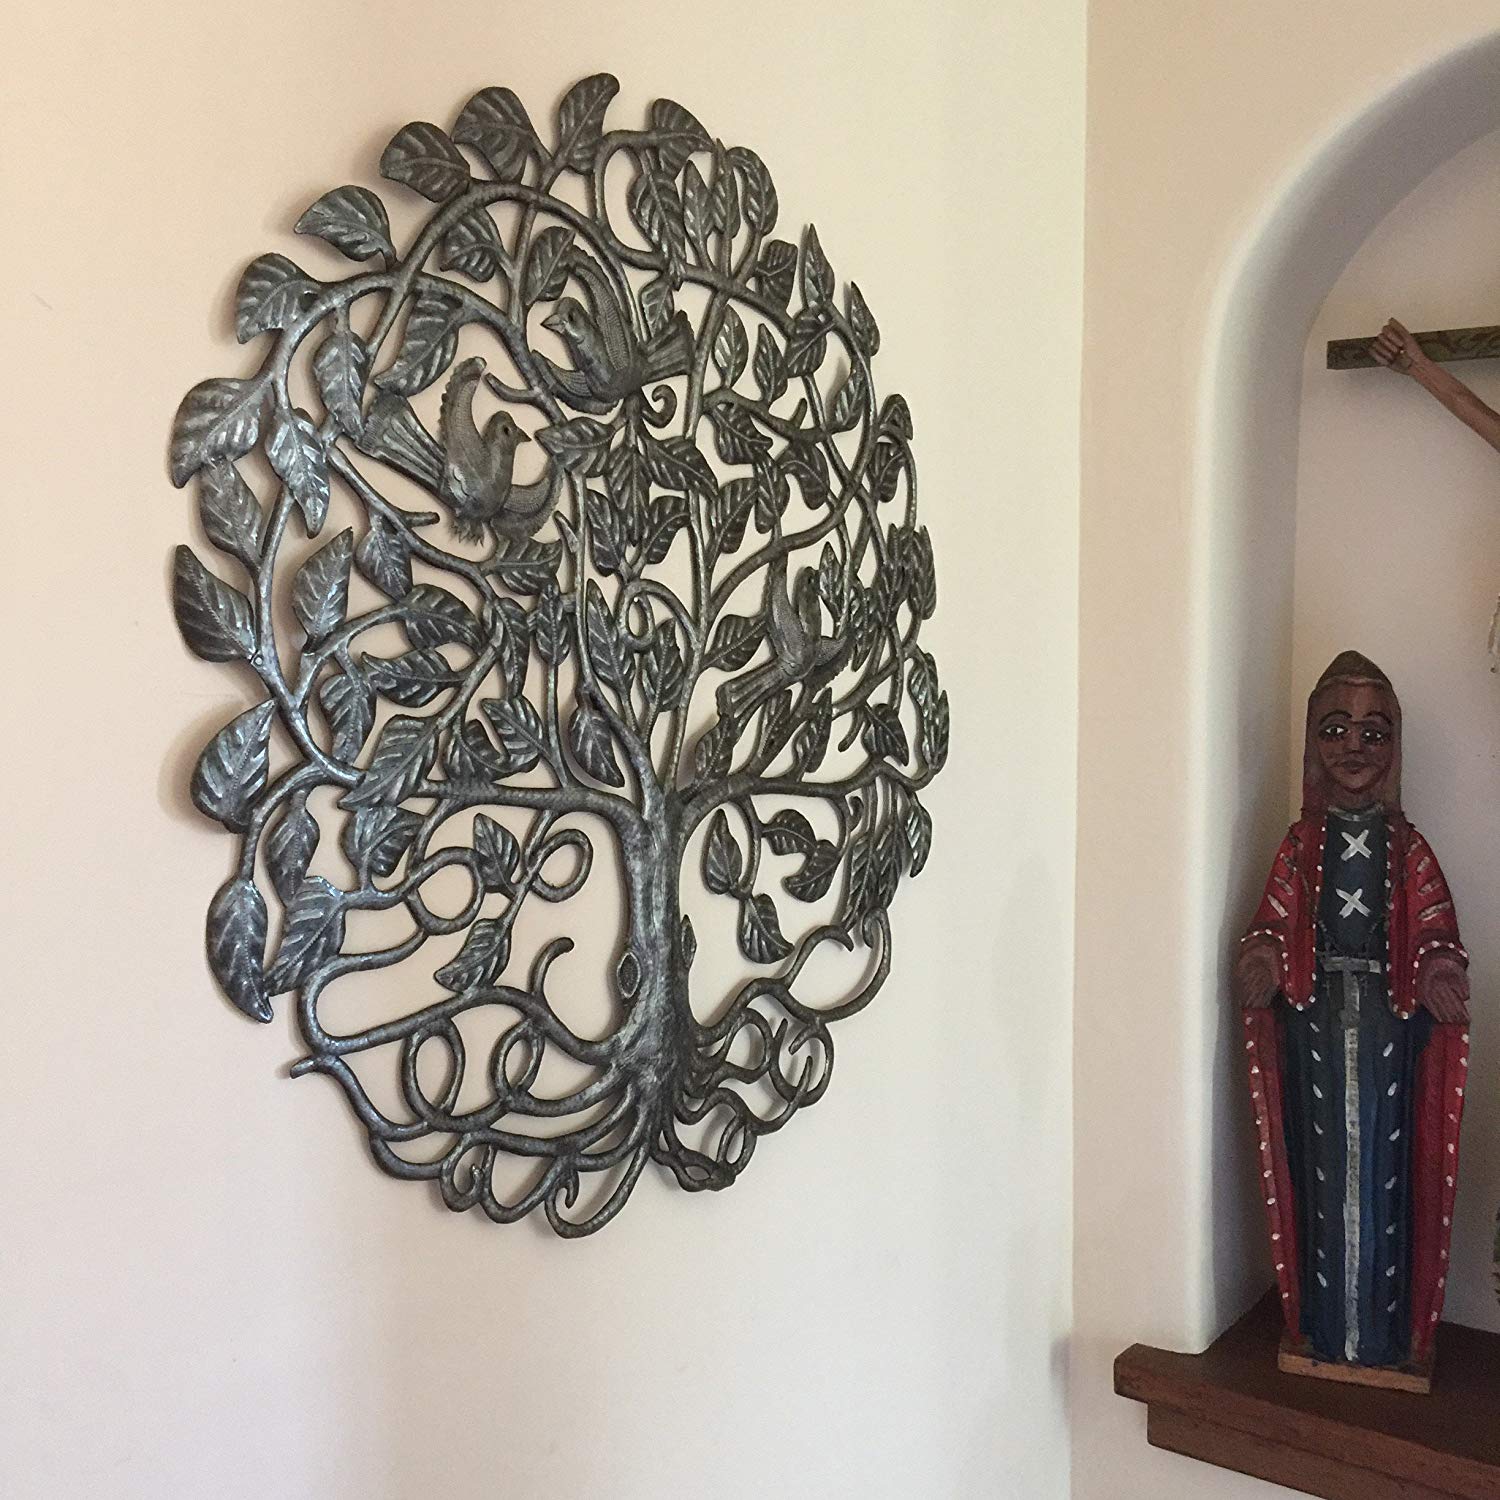 Large Metal Tree of Life, Wall Hanging Sculpture from Haiti, No Machines Used, Handmade, Home Decor 32" Round